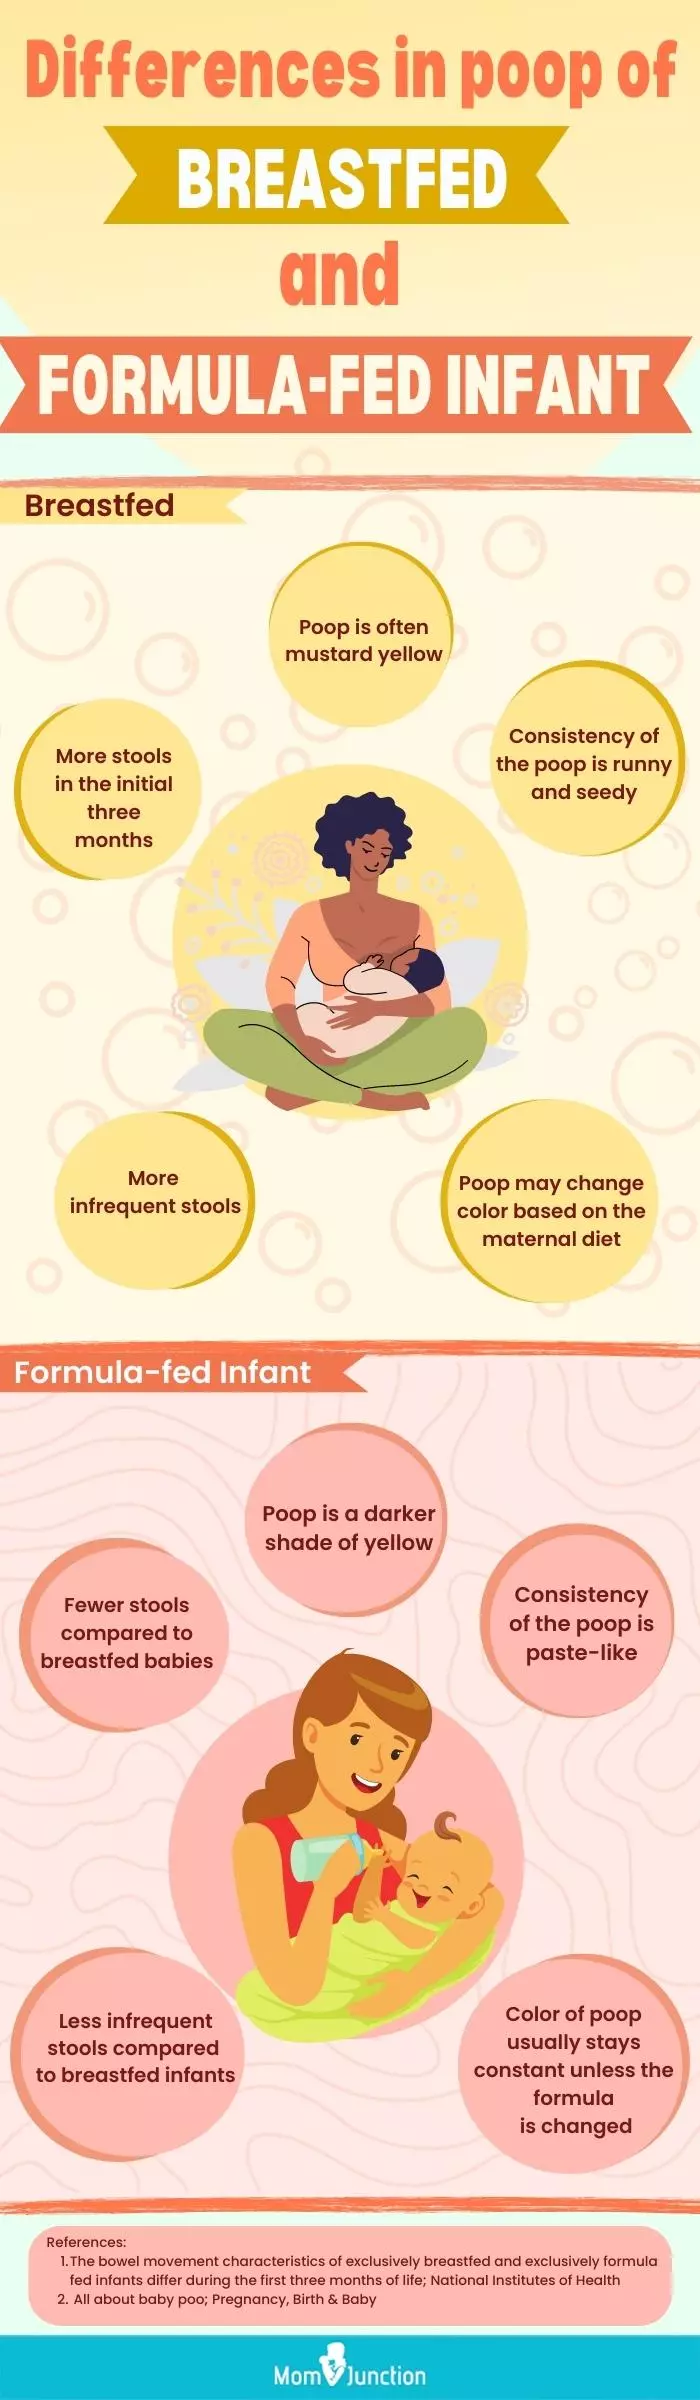 differences in poop of breastfed and formula-fed infants (infographic)